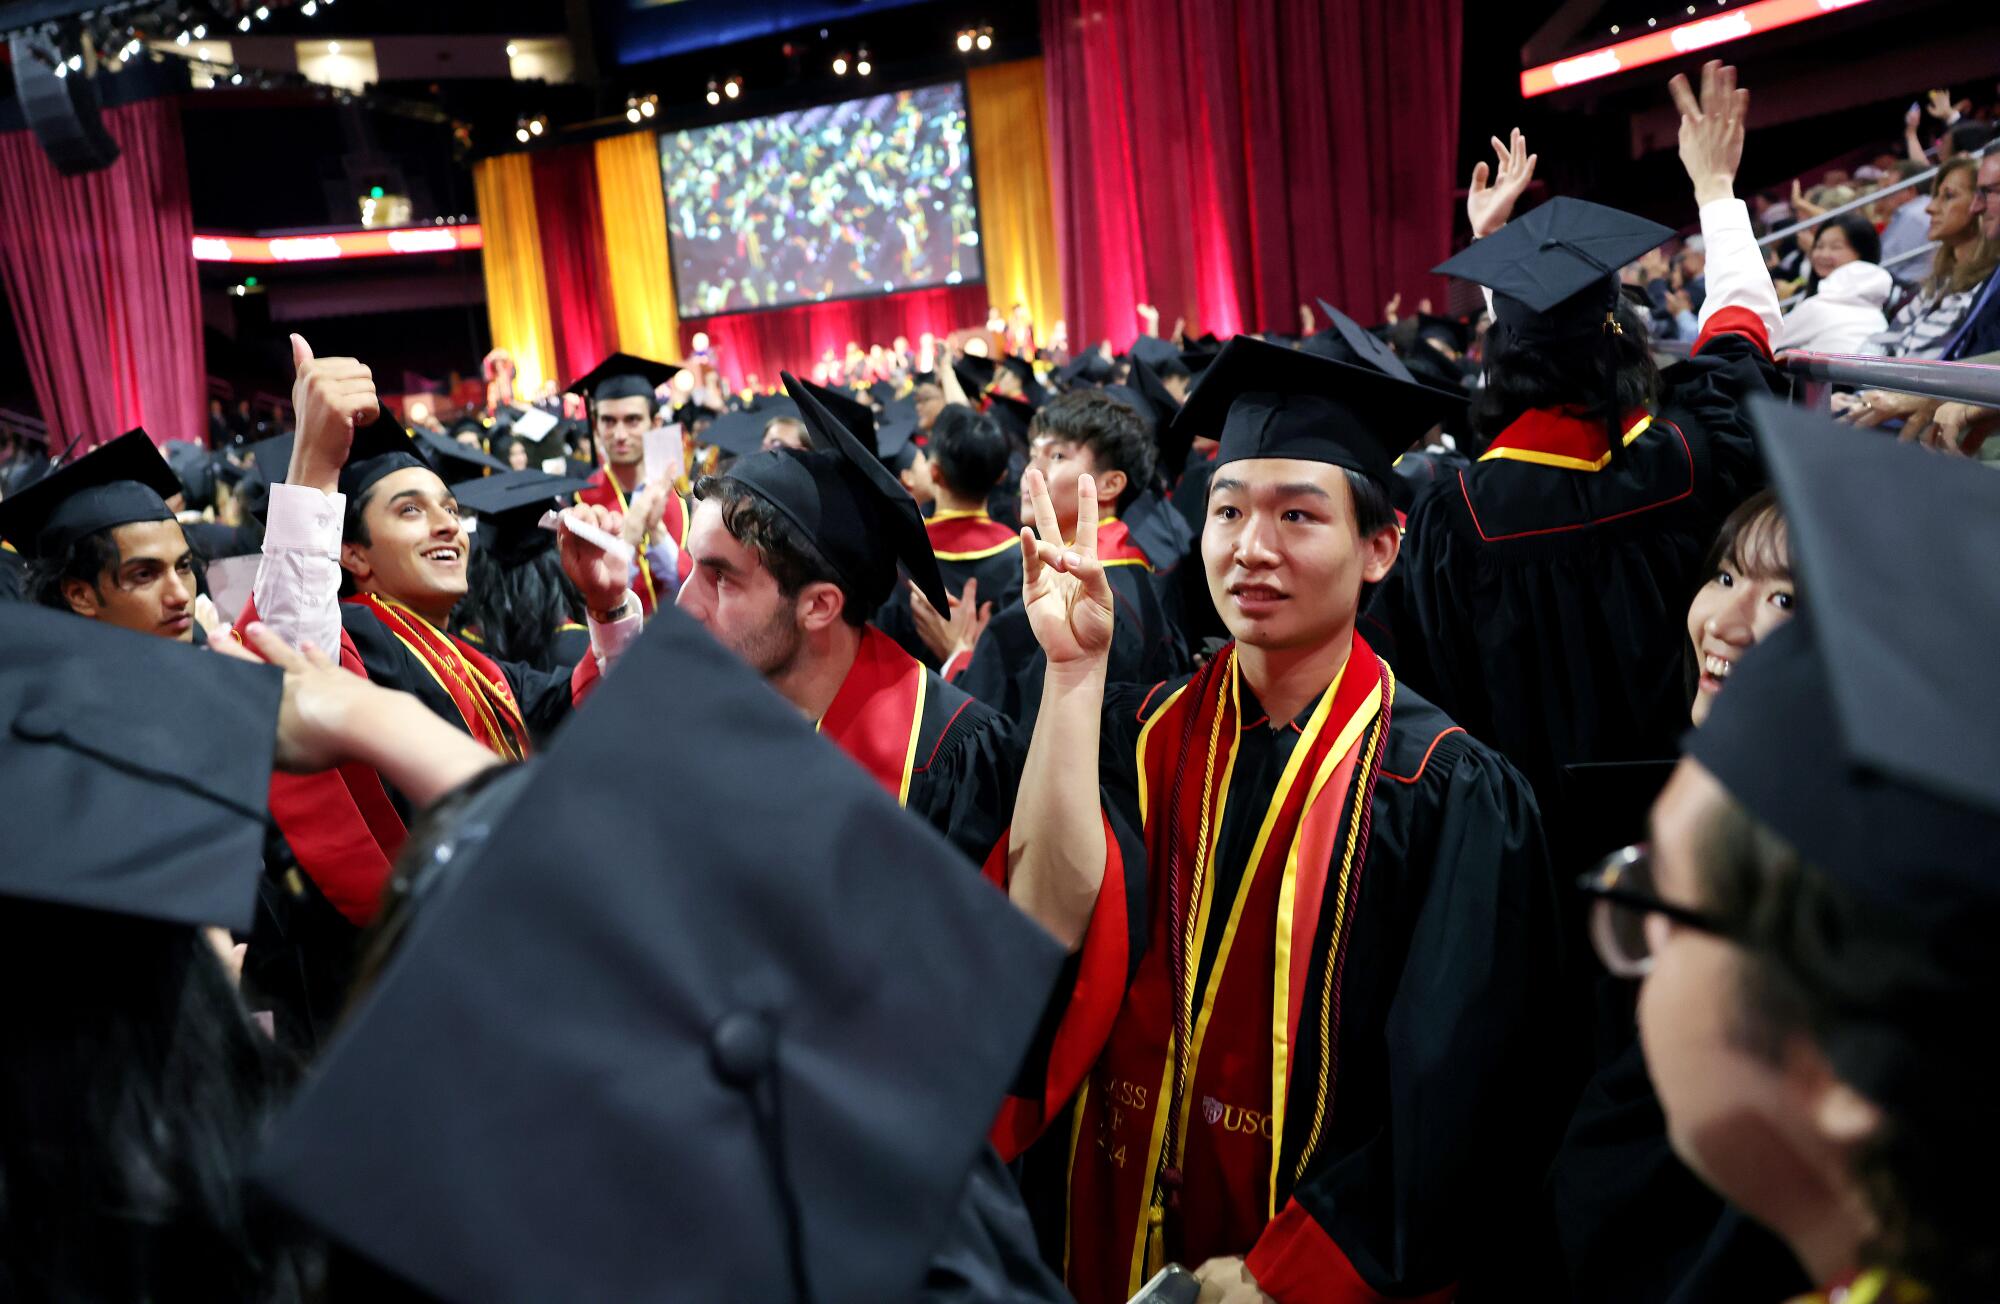 A crowd of USC graduates, one of them giving the "Fight" hand gesture, in black robes and mortarboard hats